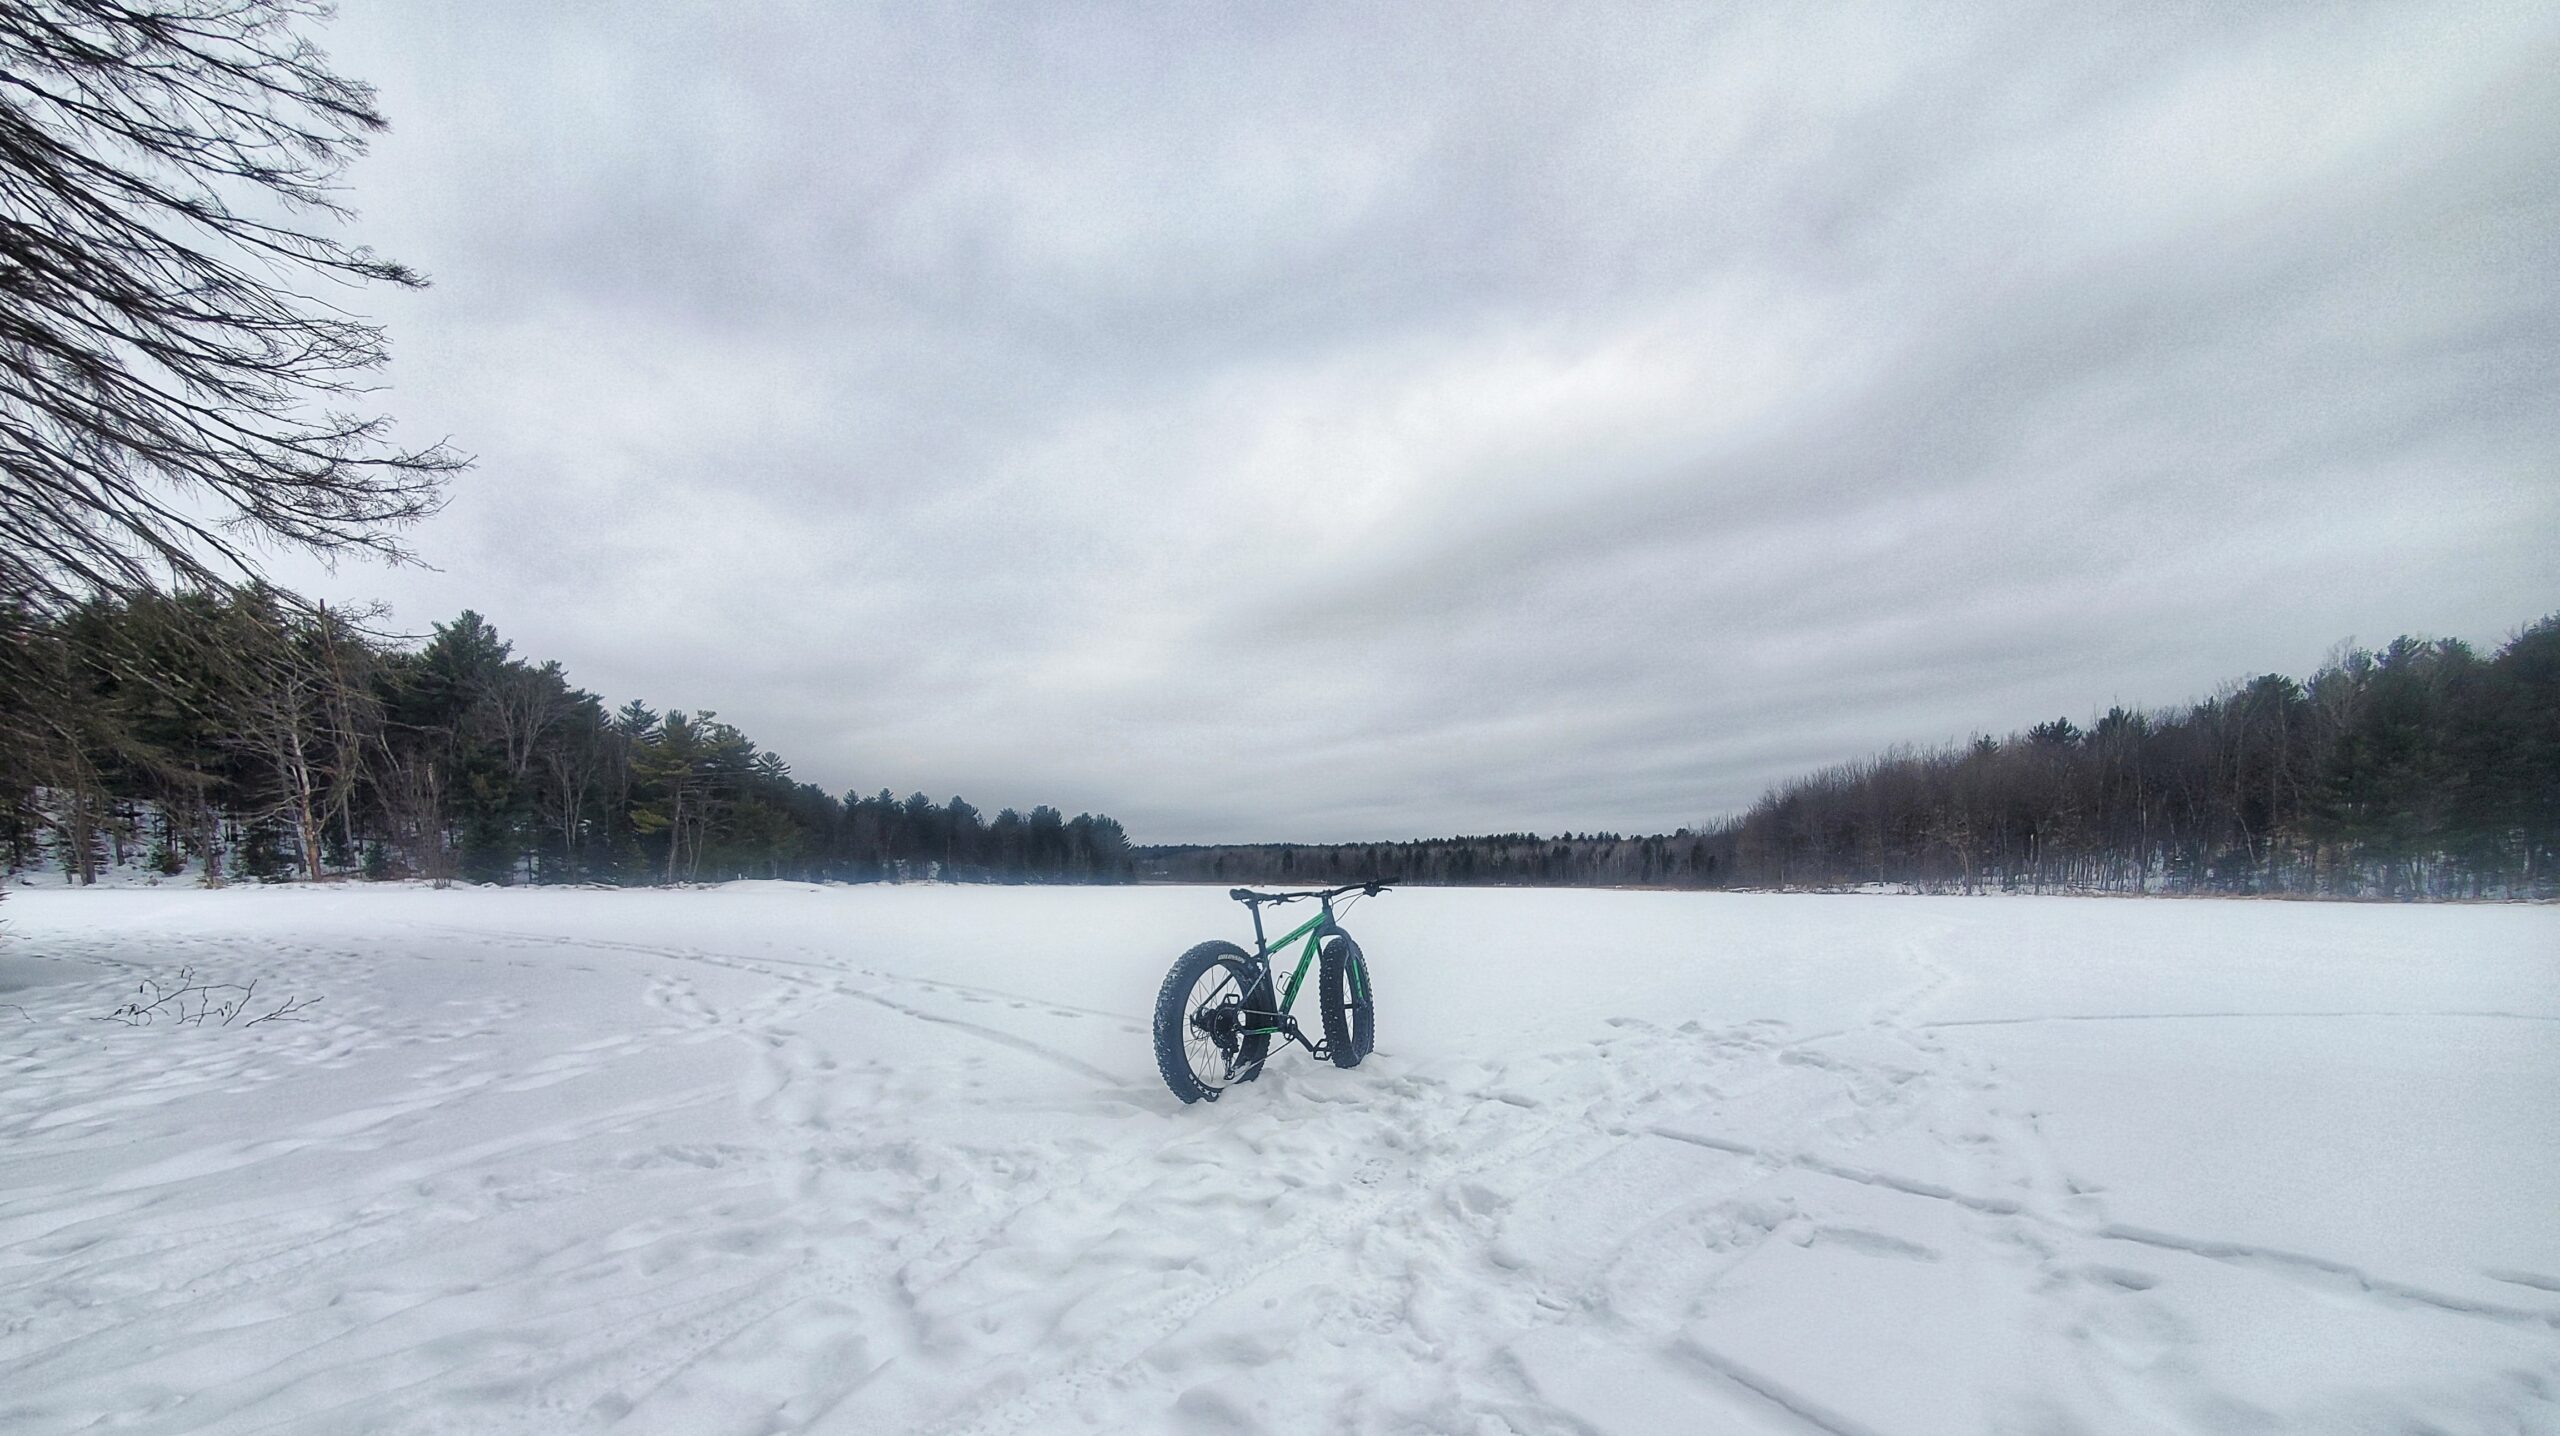 FAT BIKING IN LAC JÉRÔME. MOST UNDERRATED SPOT IN THE LAURENTIANS ?